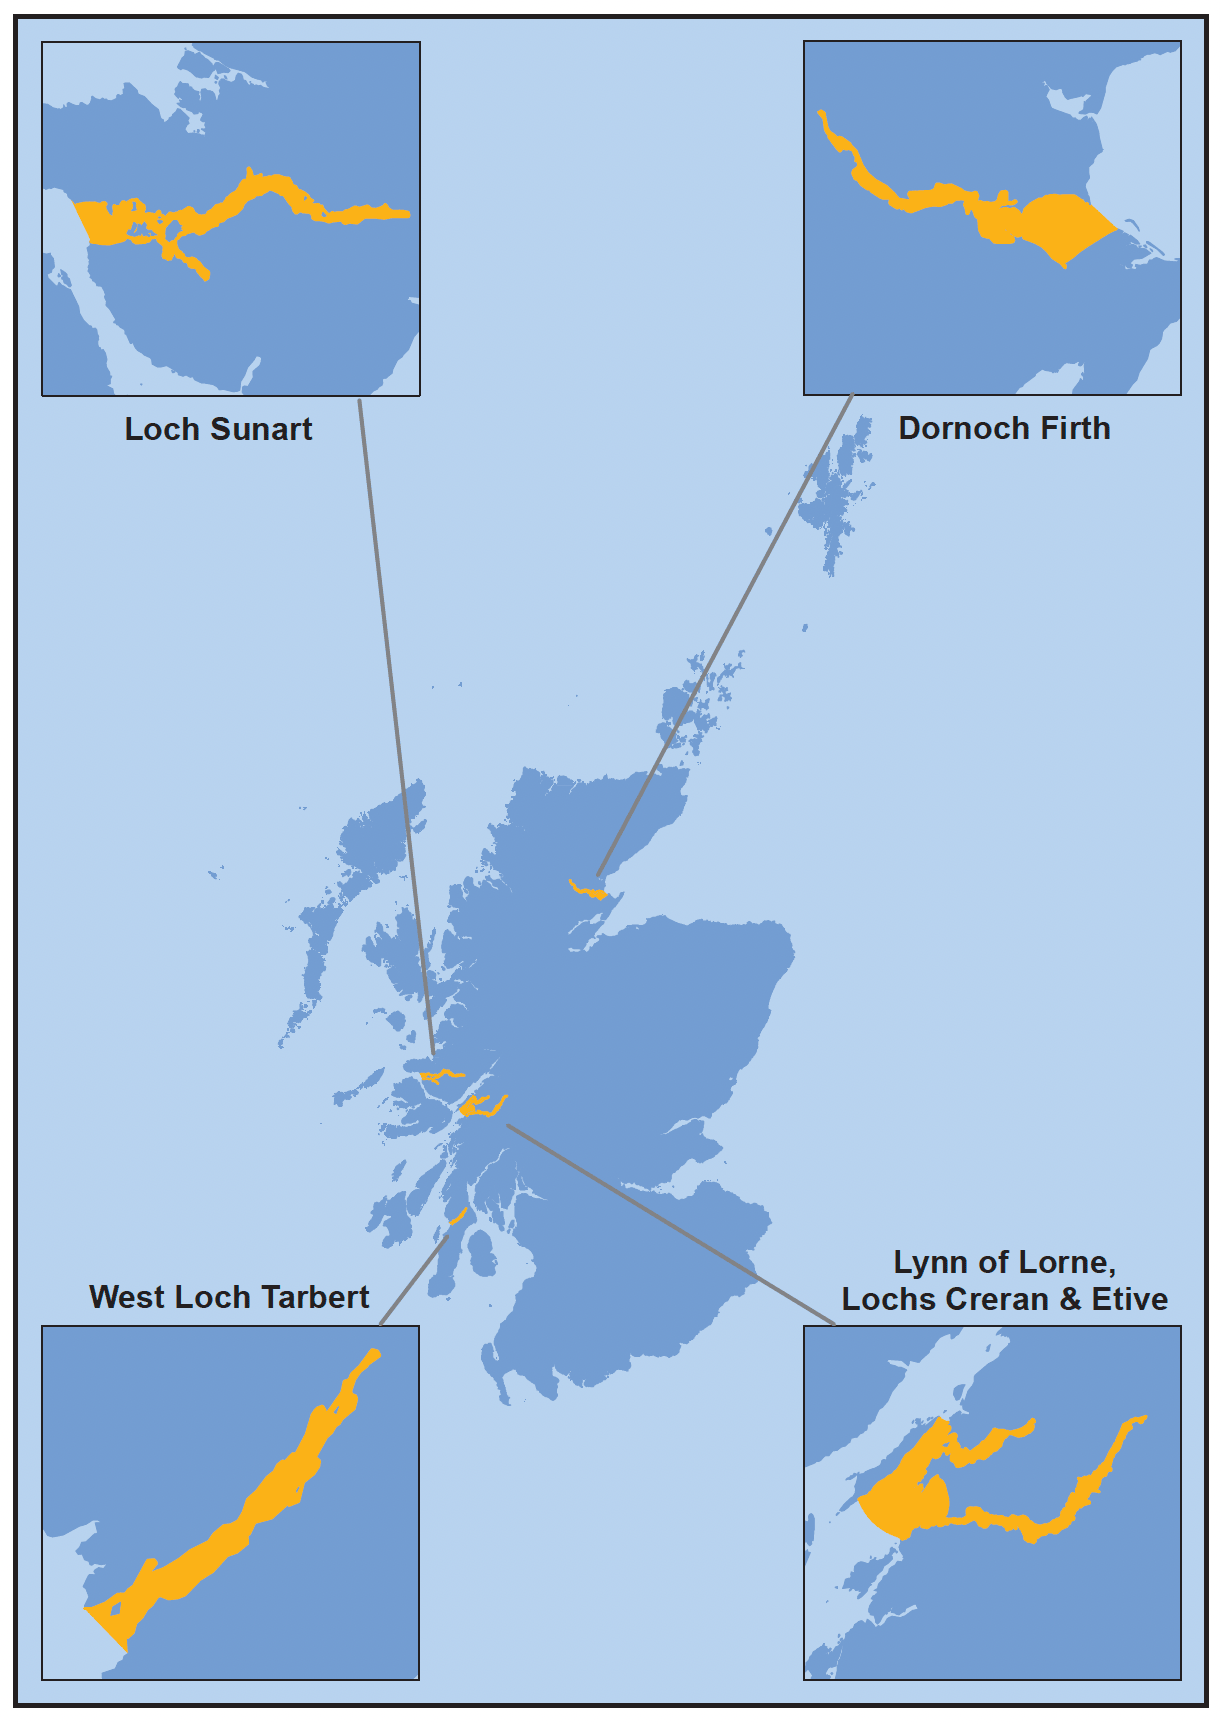 Map of Scotland illustrating the areas where movement restrictions are in place for the presence of Bonamia ostreae, these are highlighted in orange. The highlighted areas are also displayed as inset maps and show the following highlighted areas at a larger scale: Loch Sunart, the Dornoch Firth, West Loch Tarbet and Lynn of Lorne, Lochs Creran and Etive.  